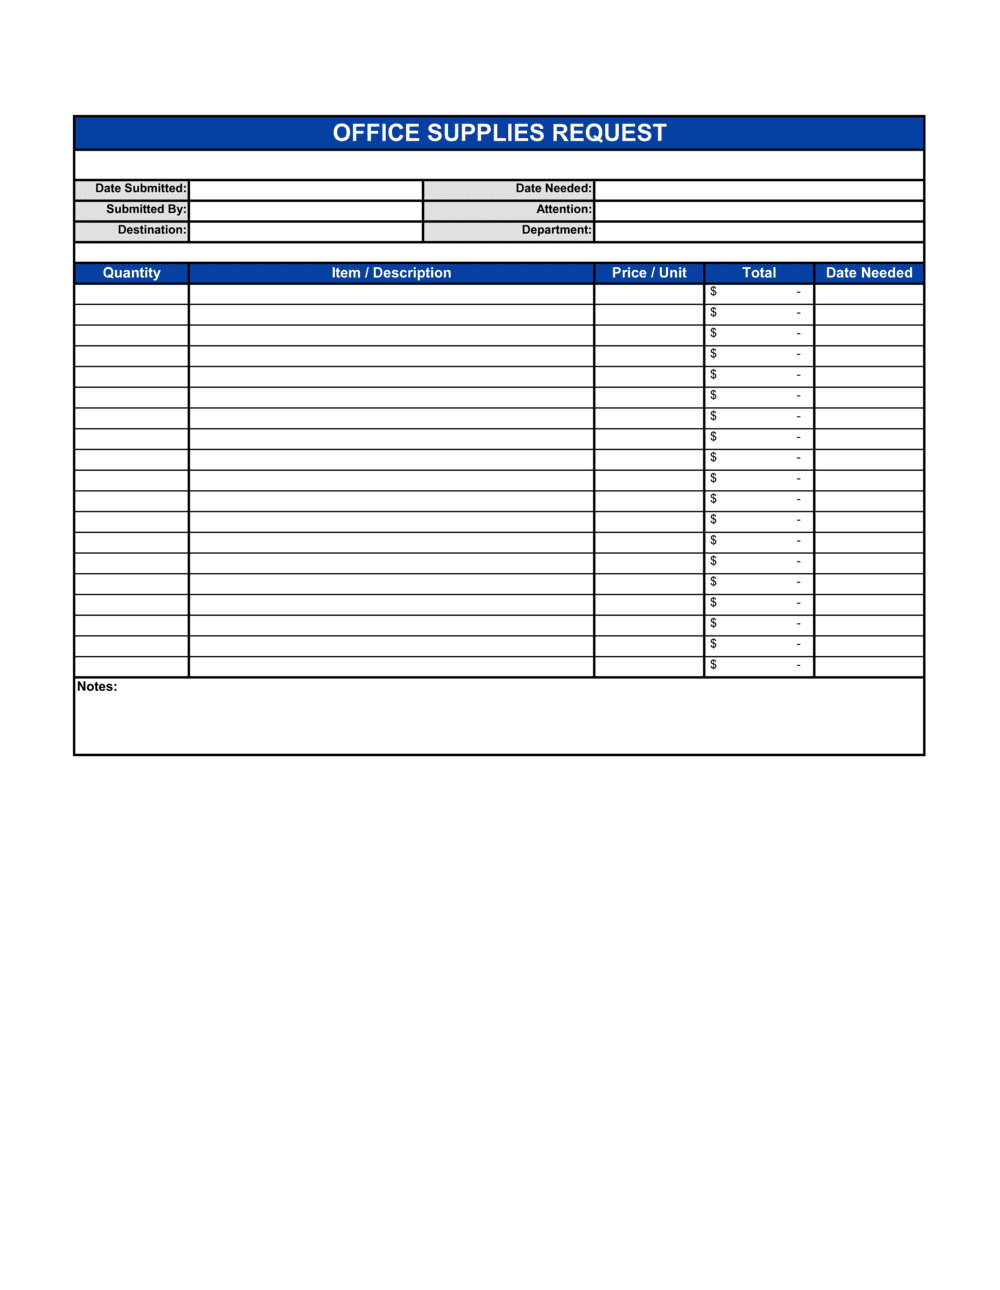 Office Supplies Request Template | by Business-in-a-Box™